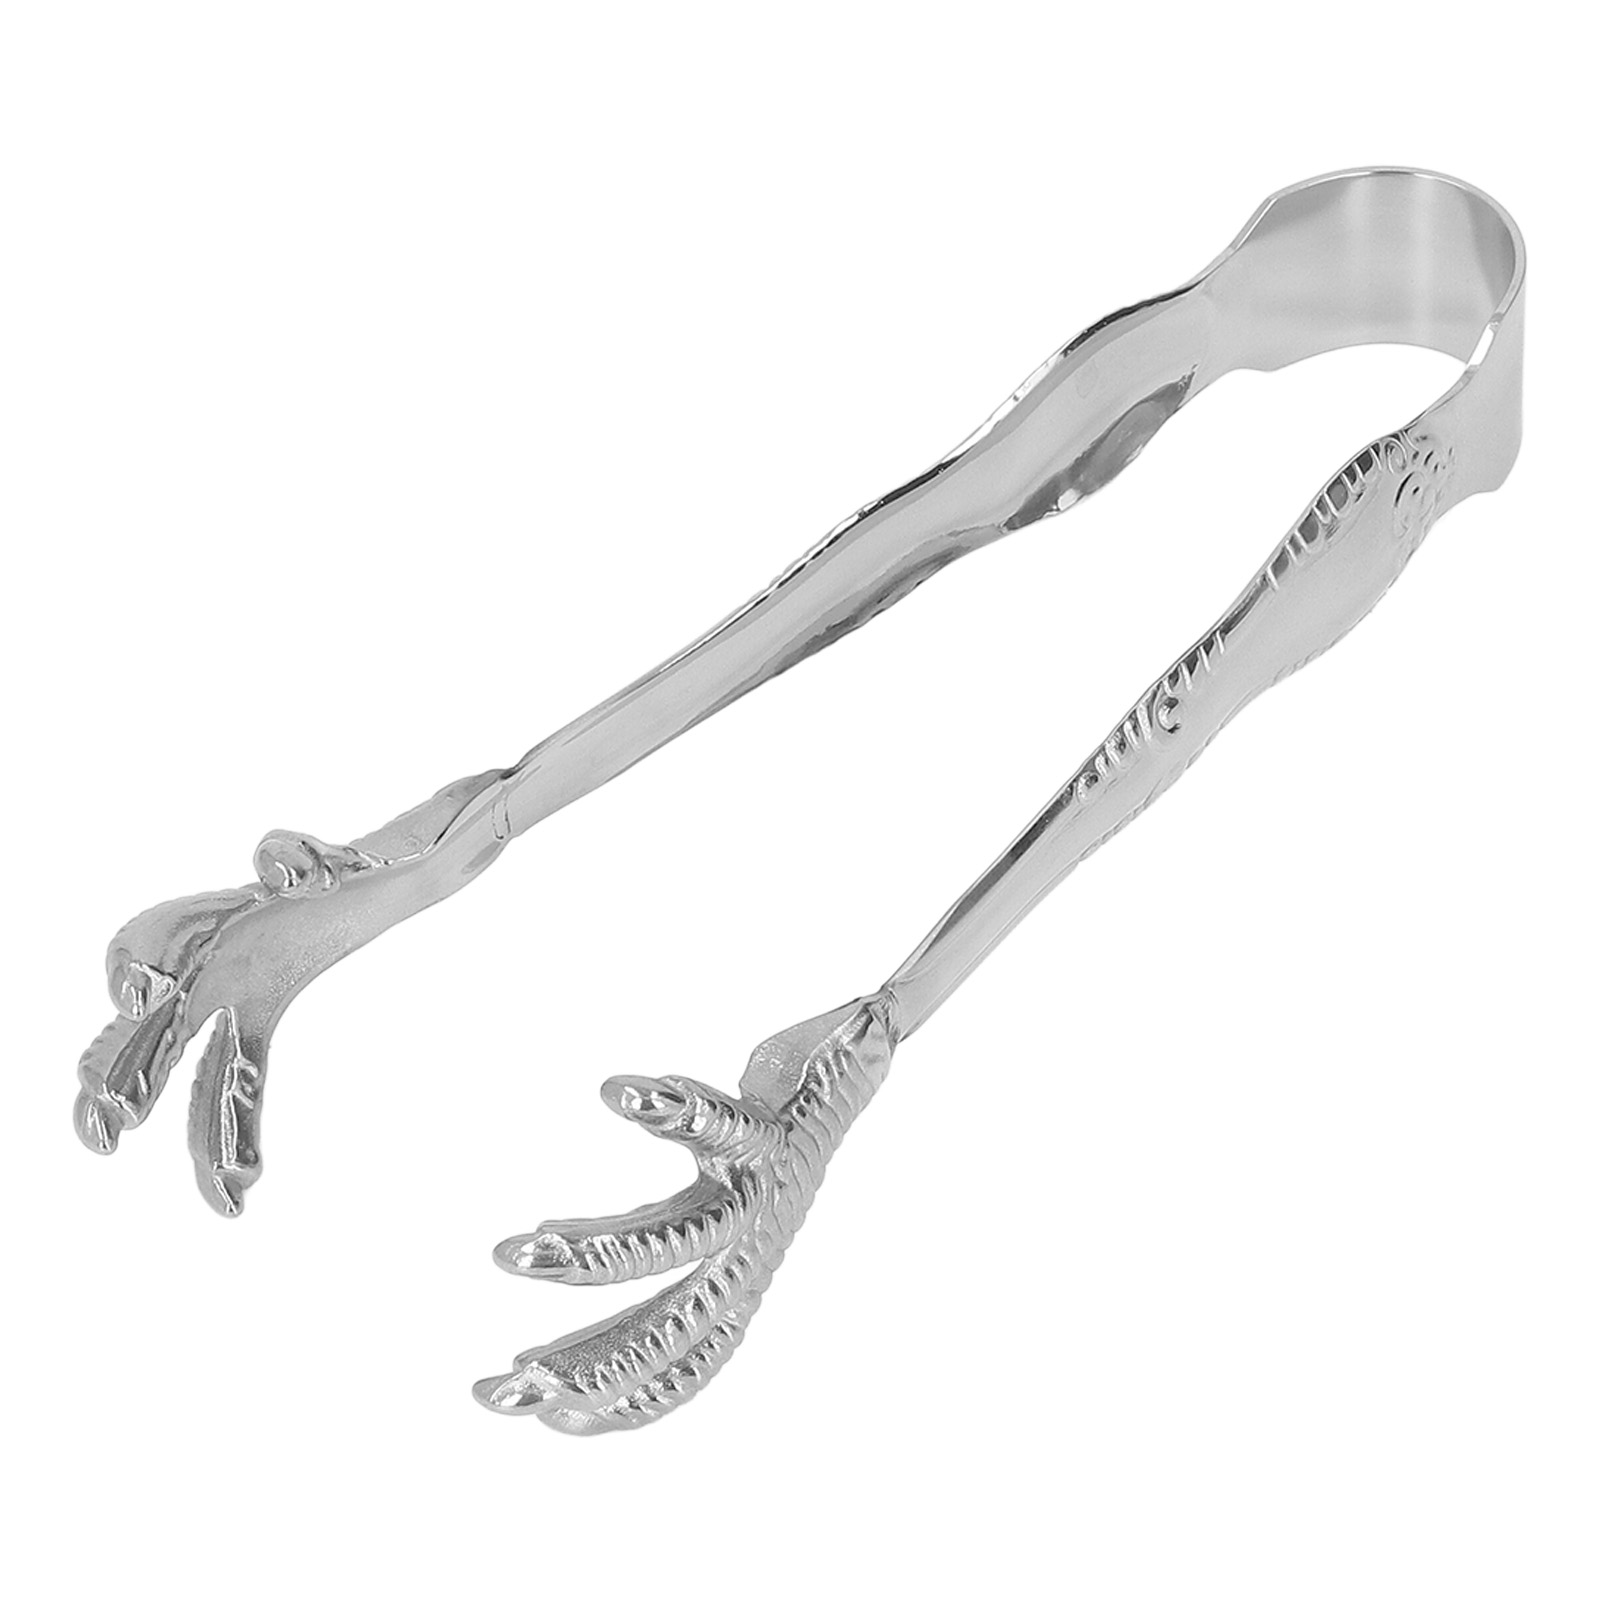 Eagle Claw Style Ice Tongs Food Grade Stainless Steel Prevents Slipping ...